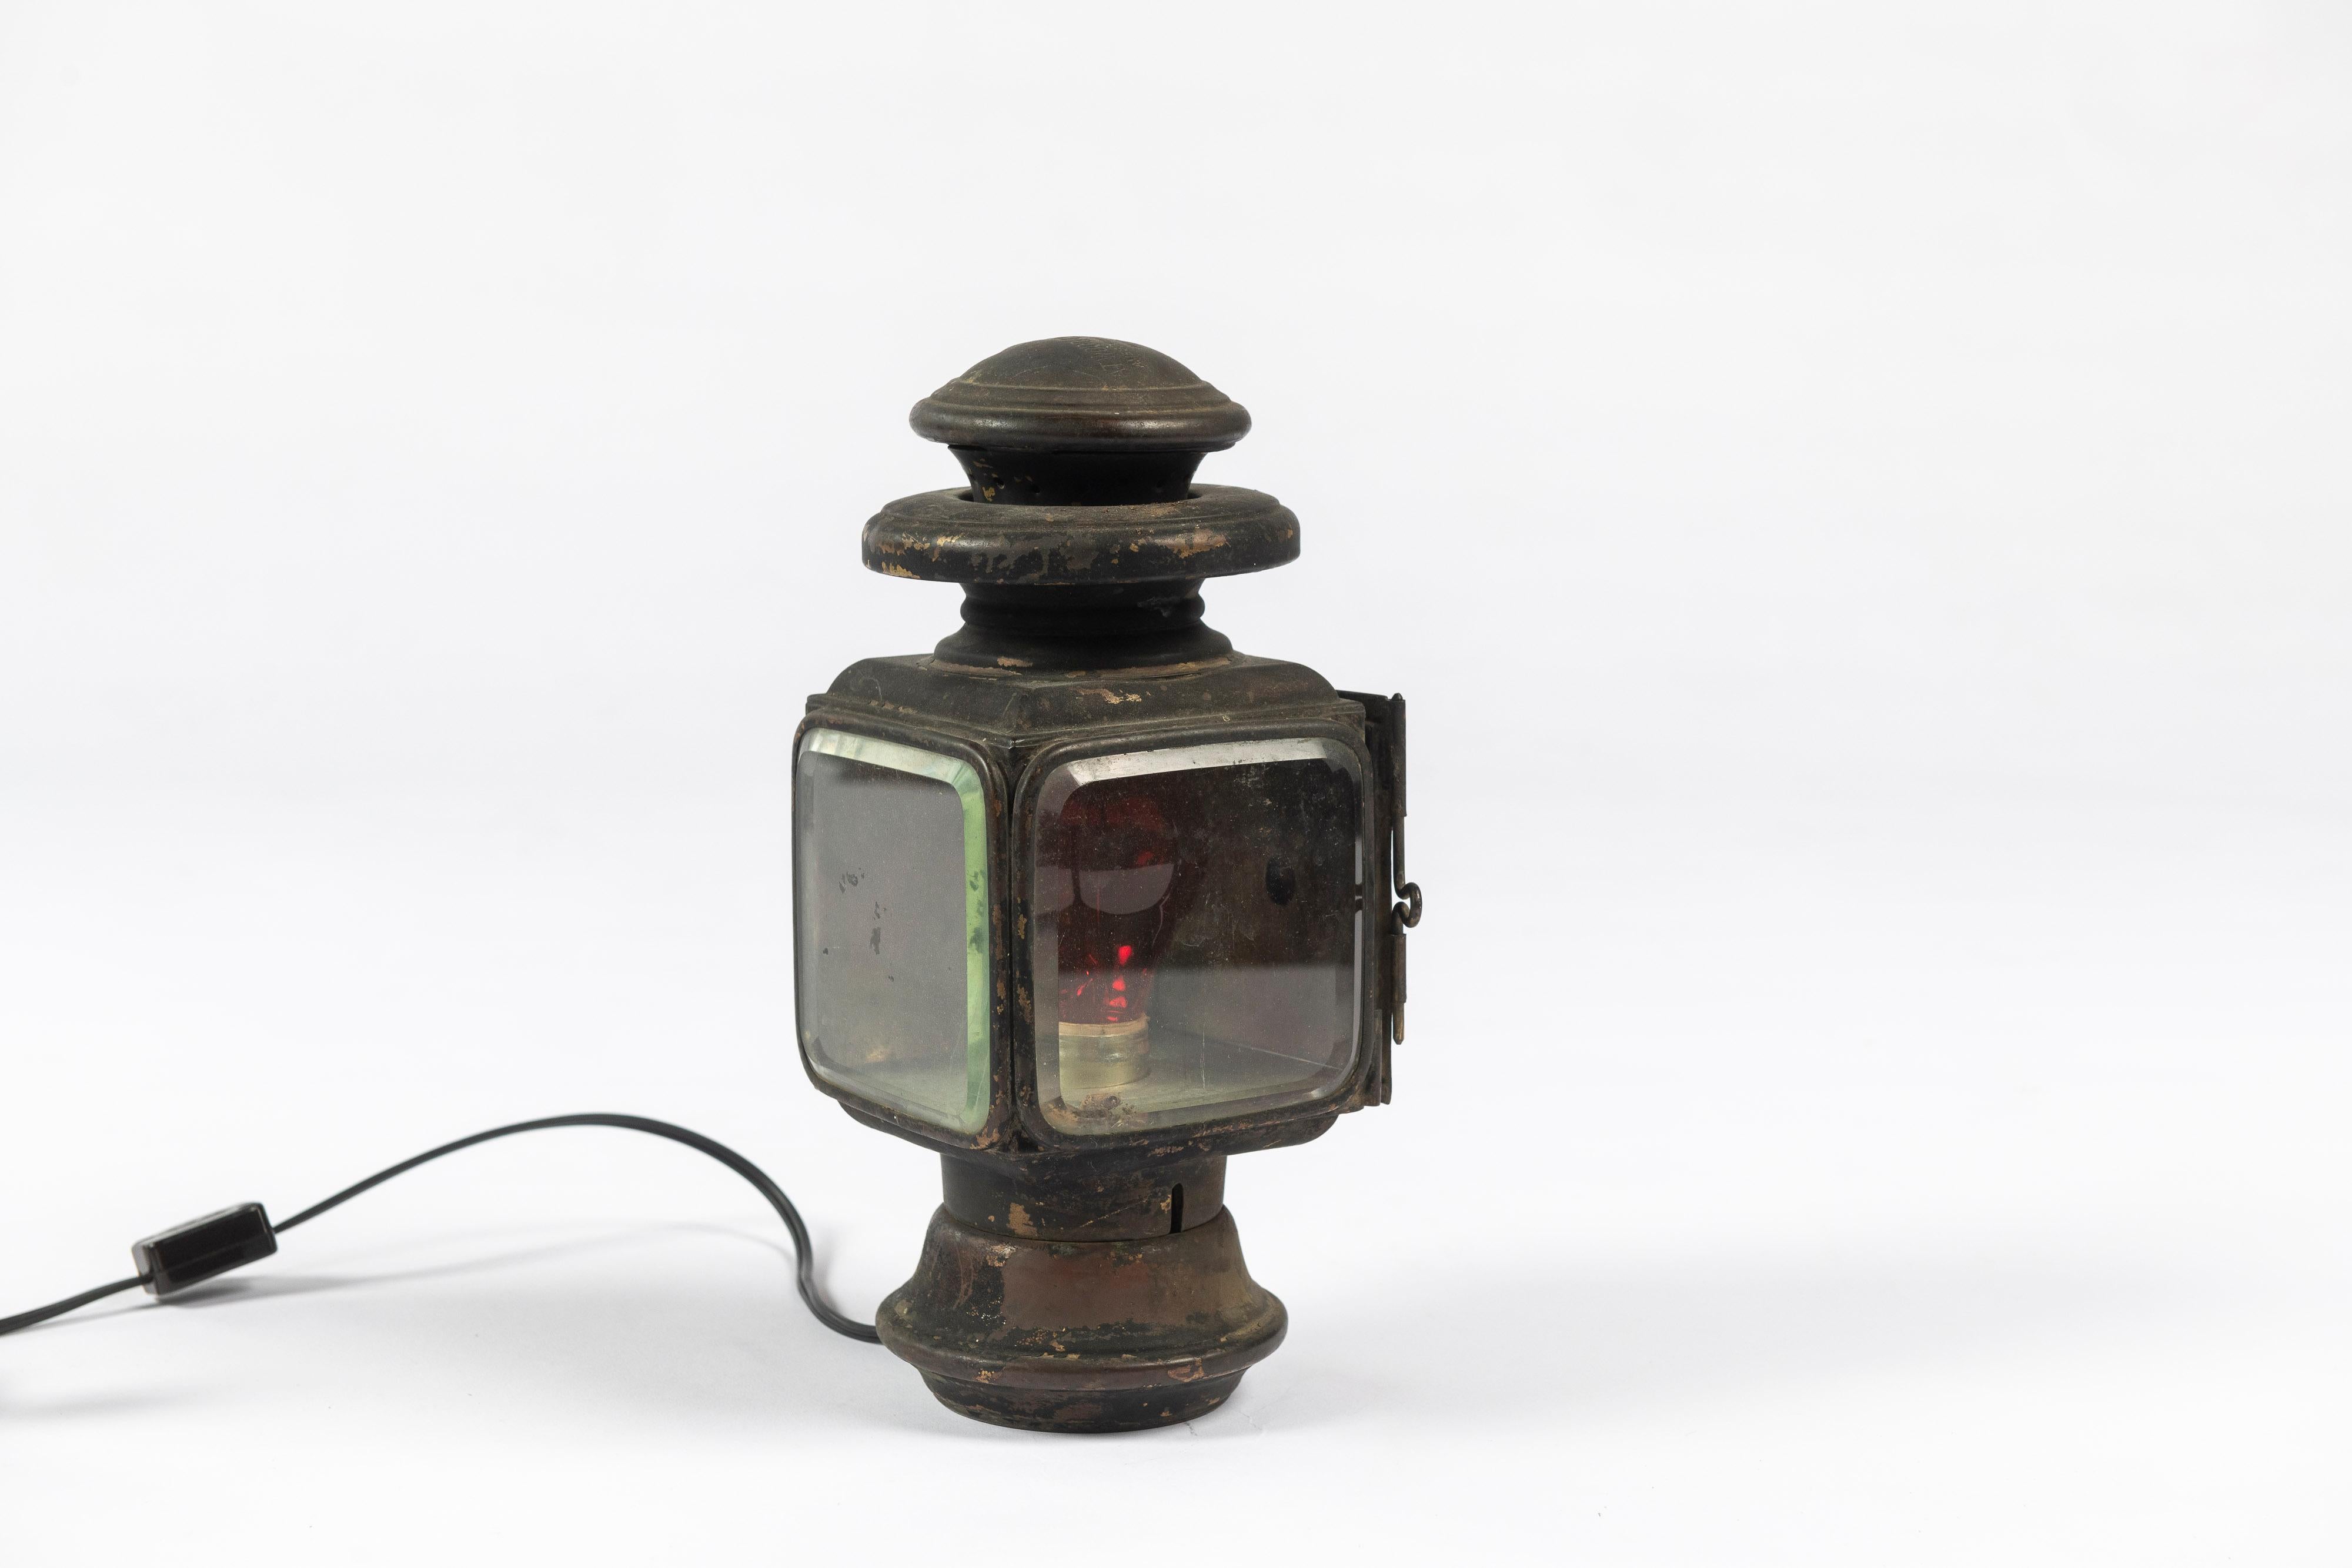 This lamp was designed and made at the turn of the 19th Century to be used as a headlight for a car or buggy, and was originally lit with a wick. It's been wired to bring a bit of that steampunk feeling to a table, credenza or that spot where you